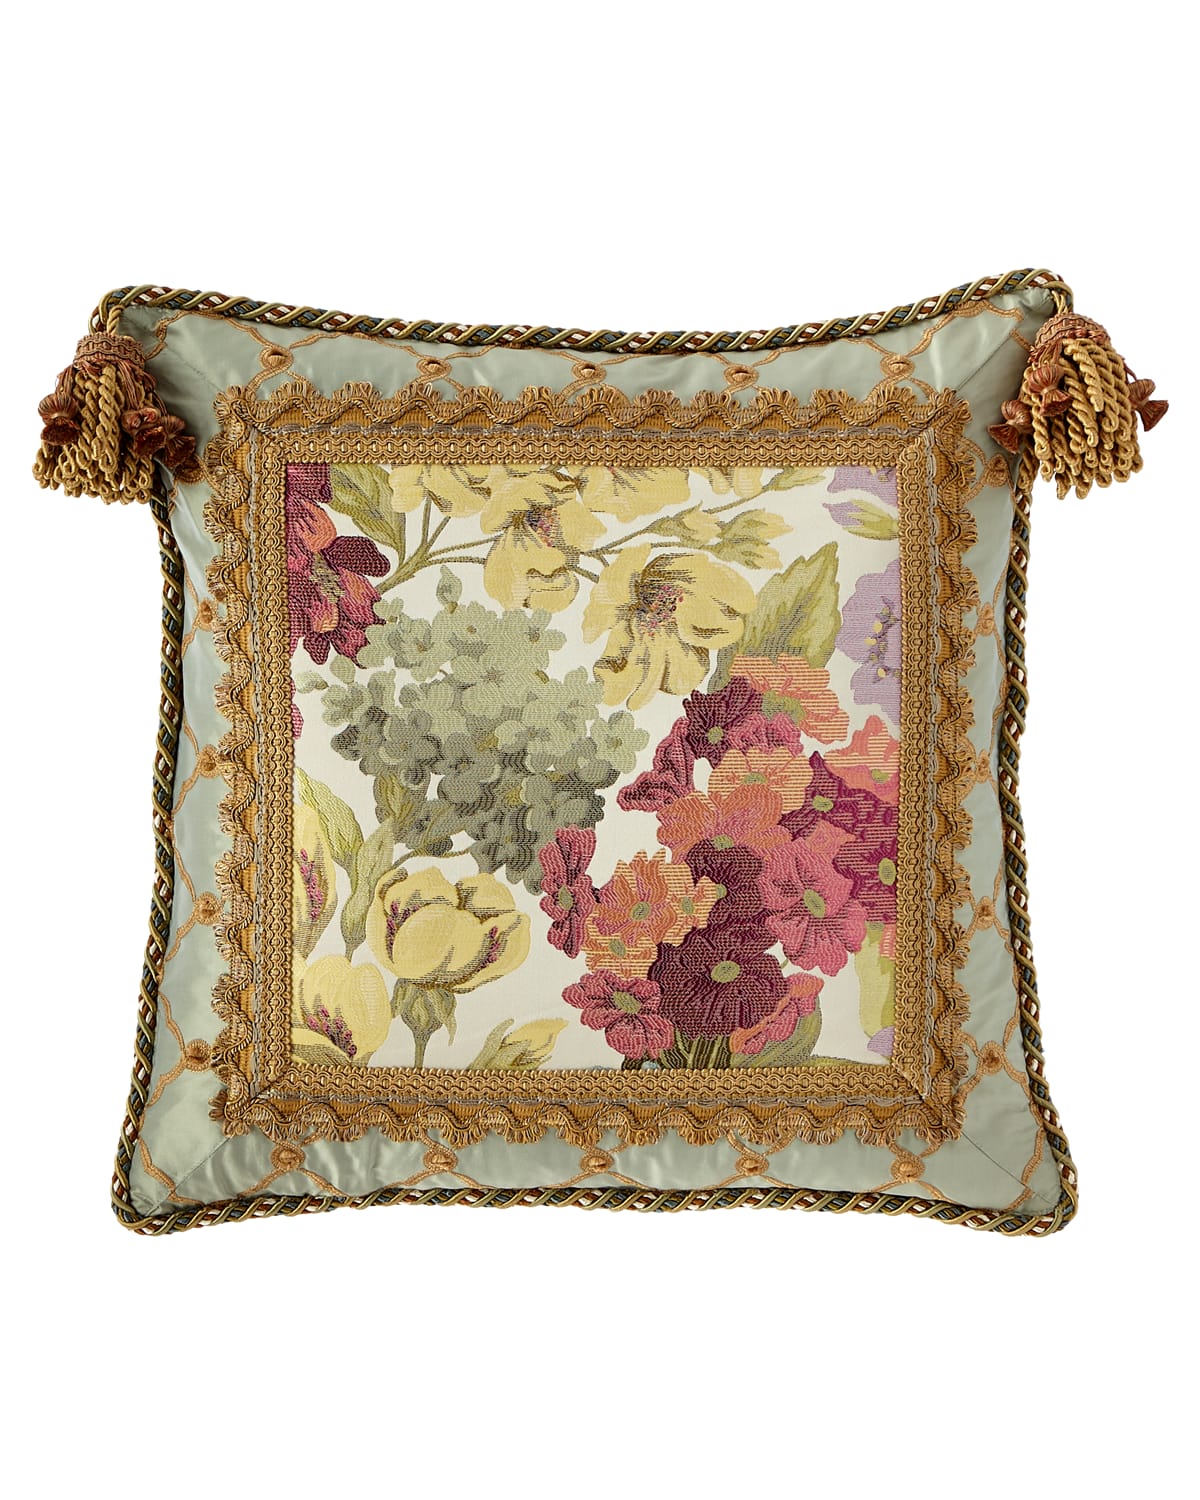 Image Sweet Dreams Giverny Boutique Pillow with Tassels